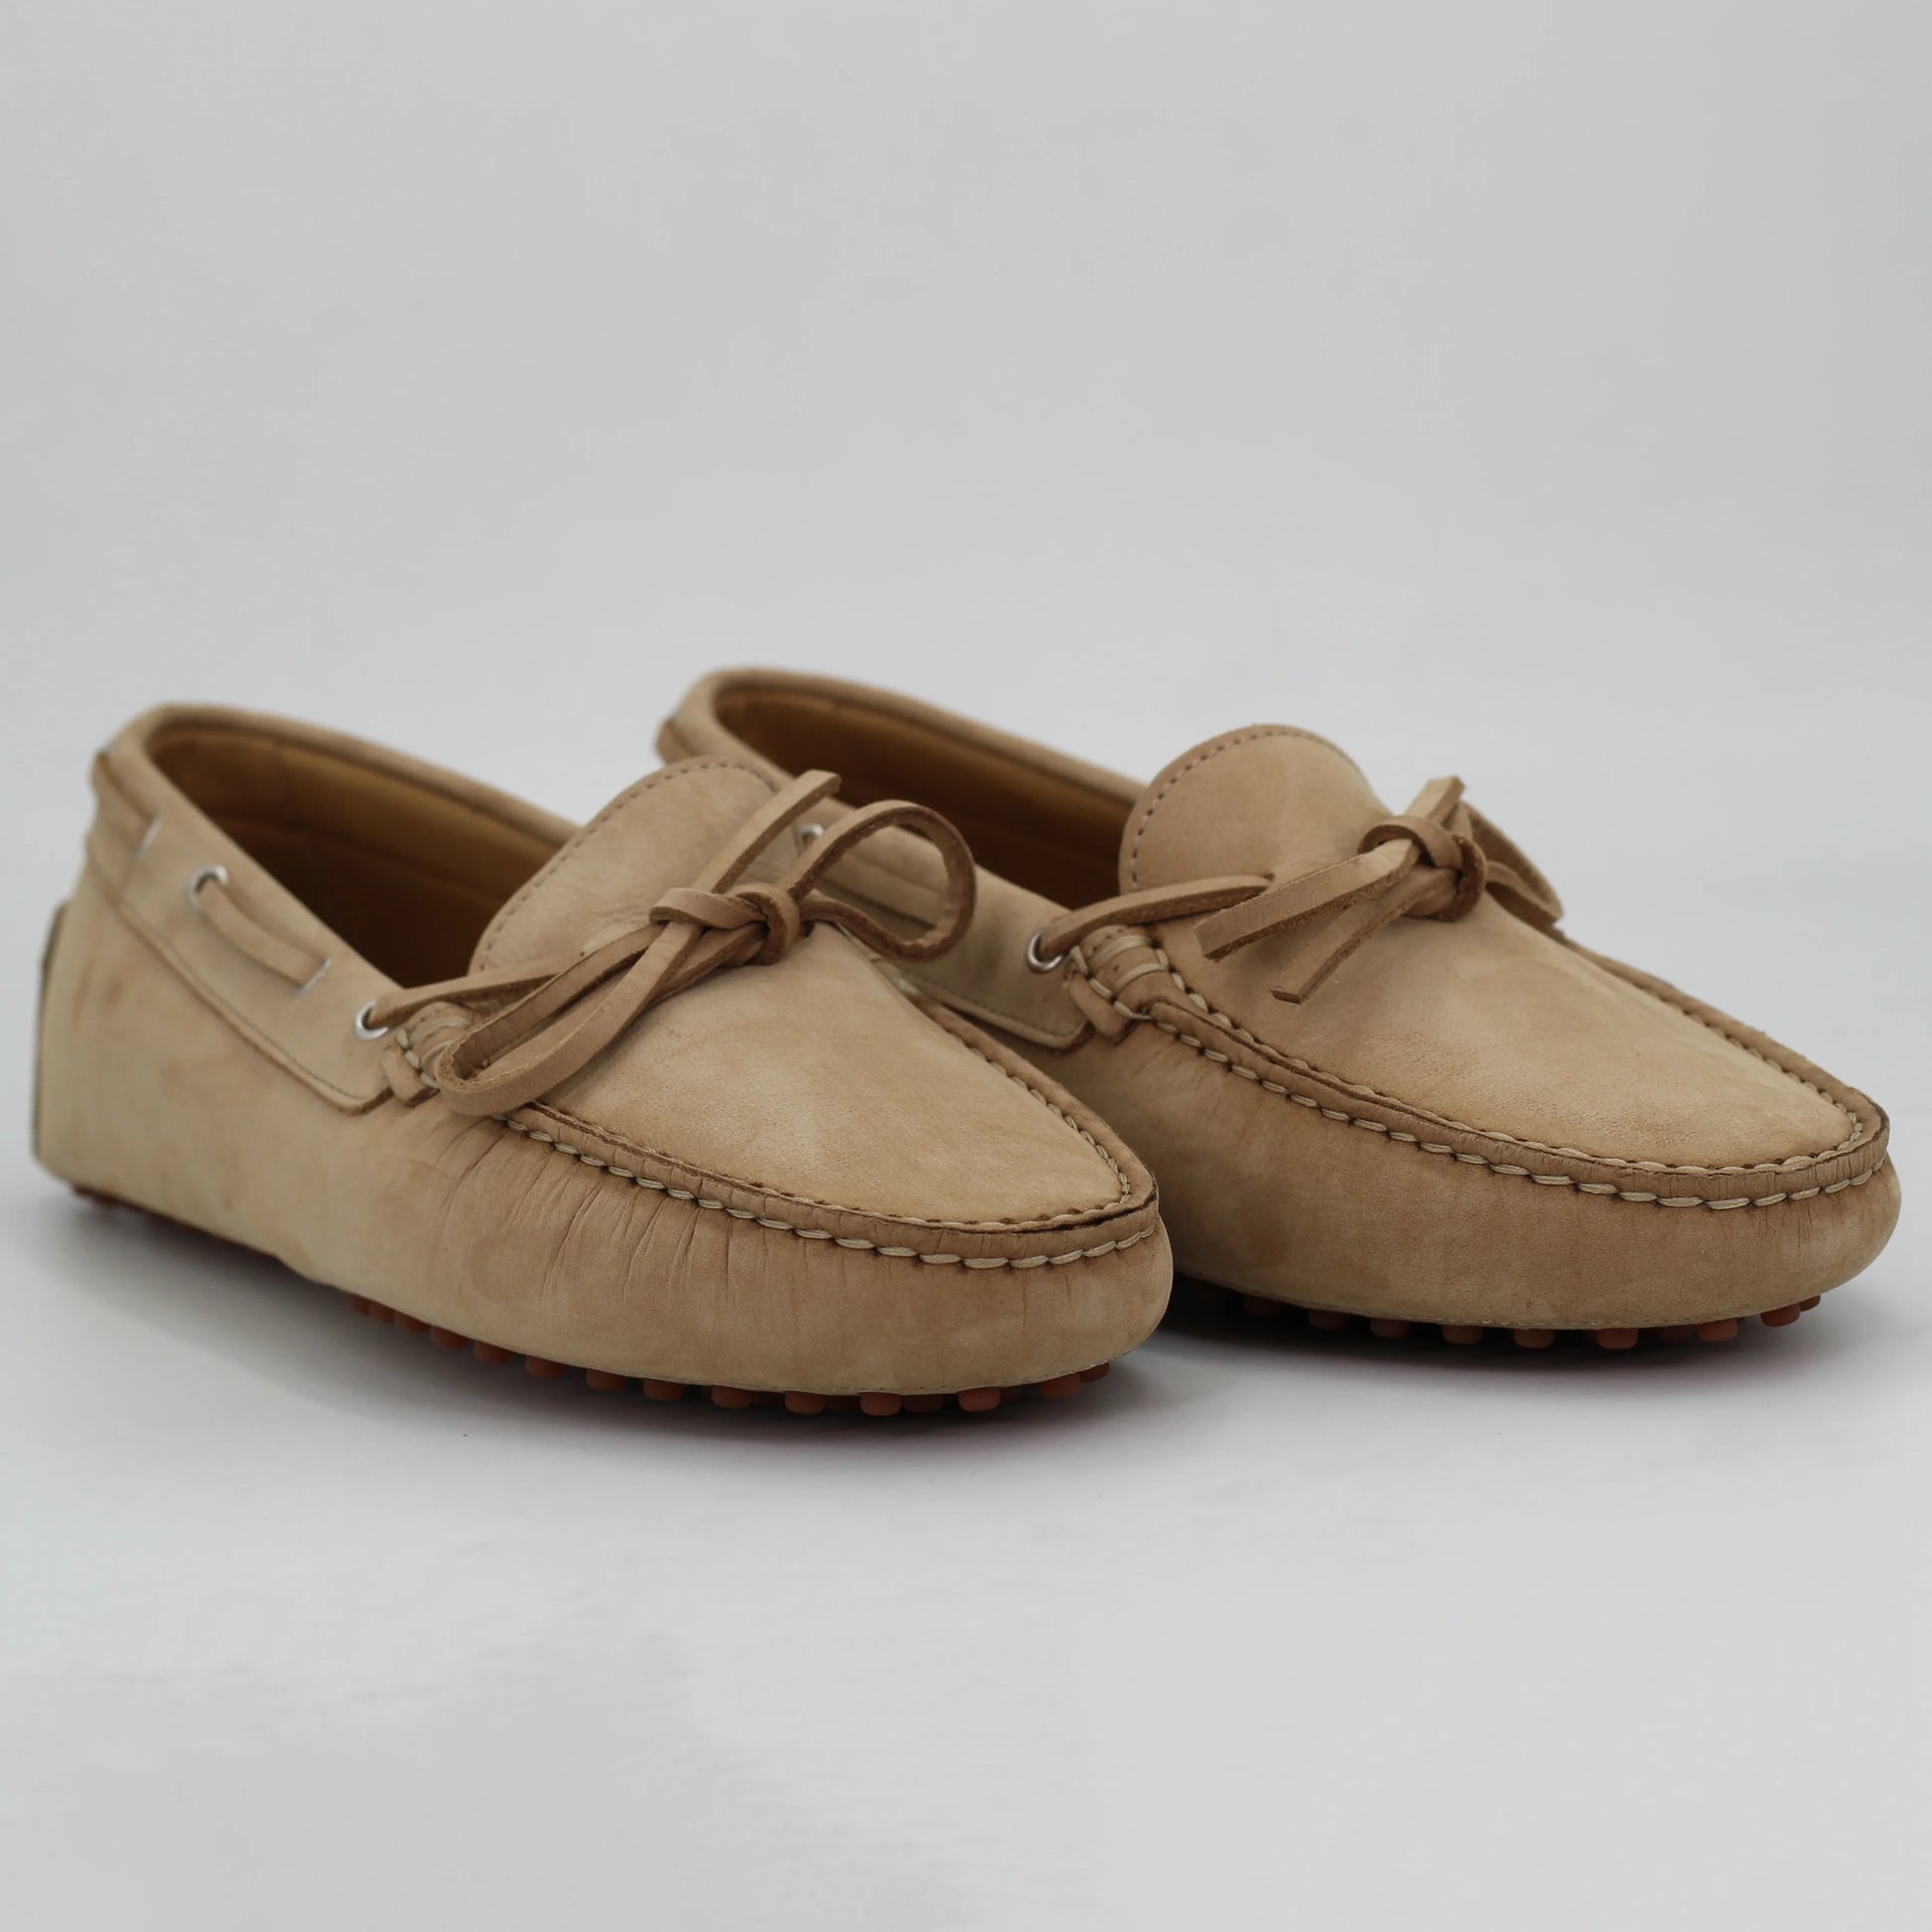 Shop Handmade Italian Leather suede moccasin in tan (COND04011) or browse our range of hand-made Italian shoes in leather or suede in-store at Aliverti Cape Town, or shop online. We deliver in South Africa & offer multiple payment plans as well as accept multiple safe & secure payment methods.